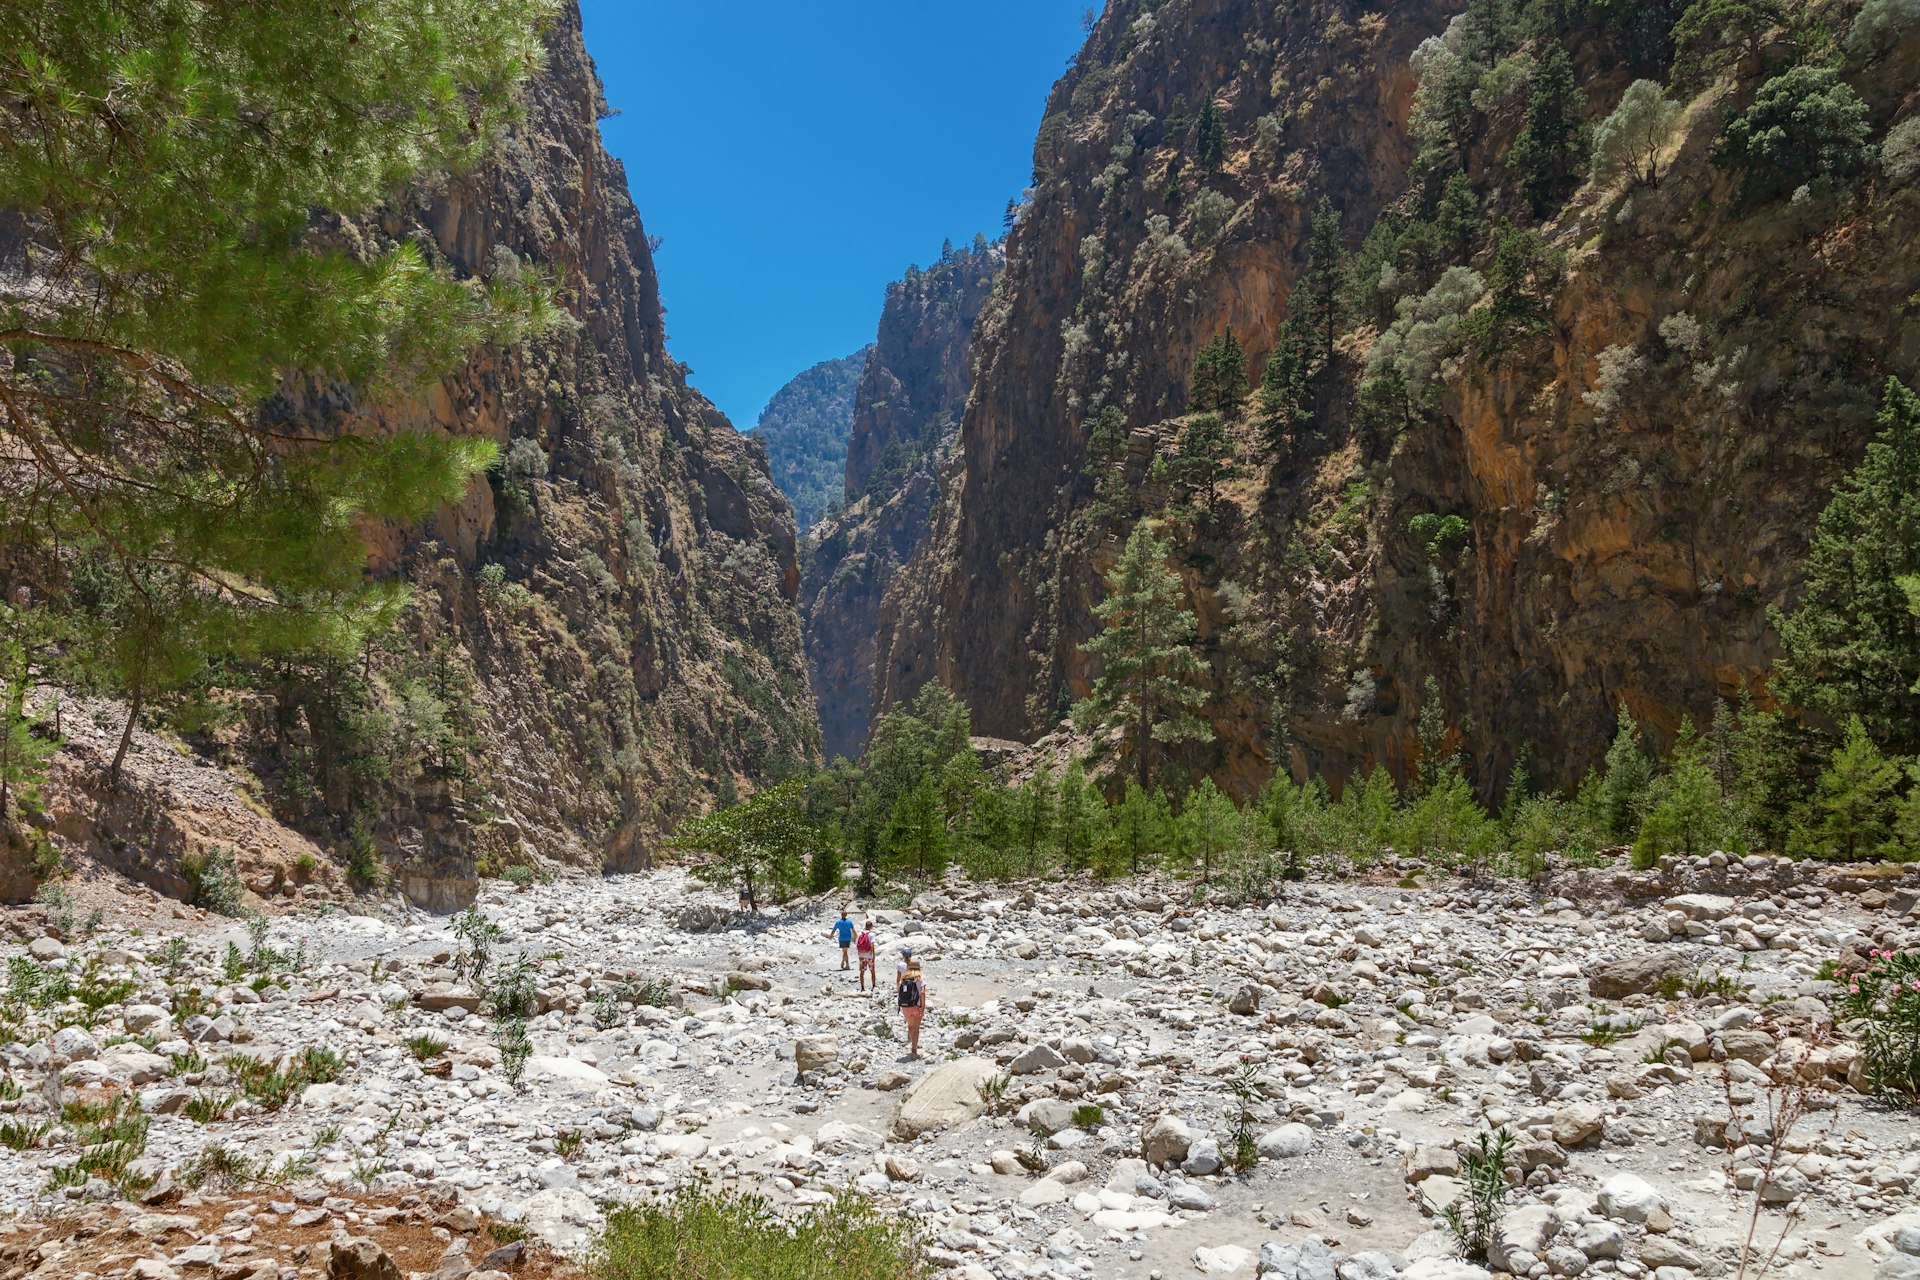 Hikers walking through a gorge are dwarfed by the vast rock walls towering above them